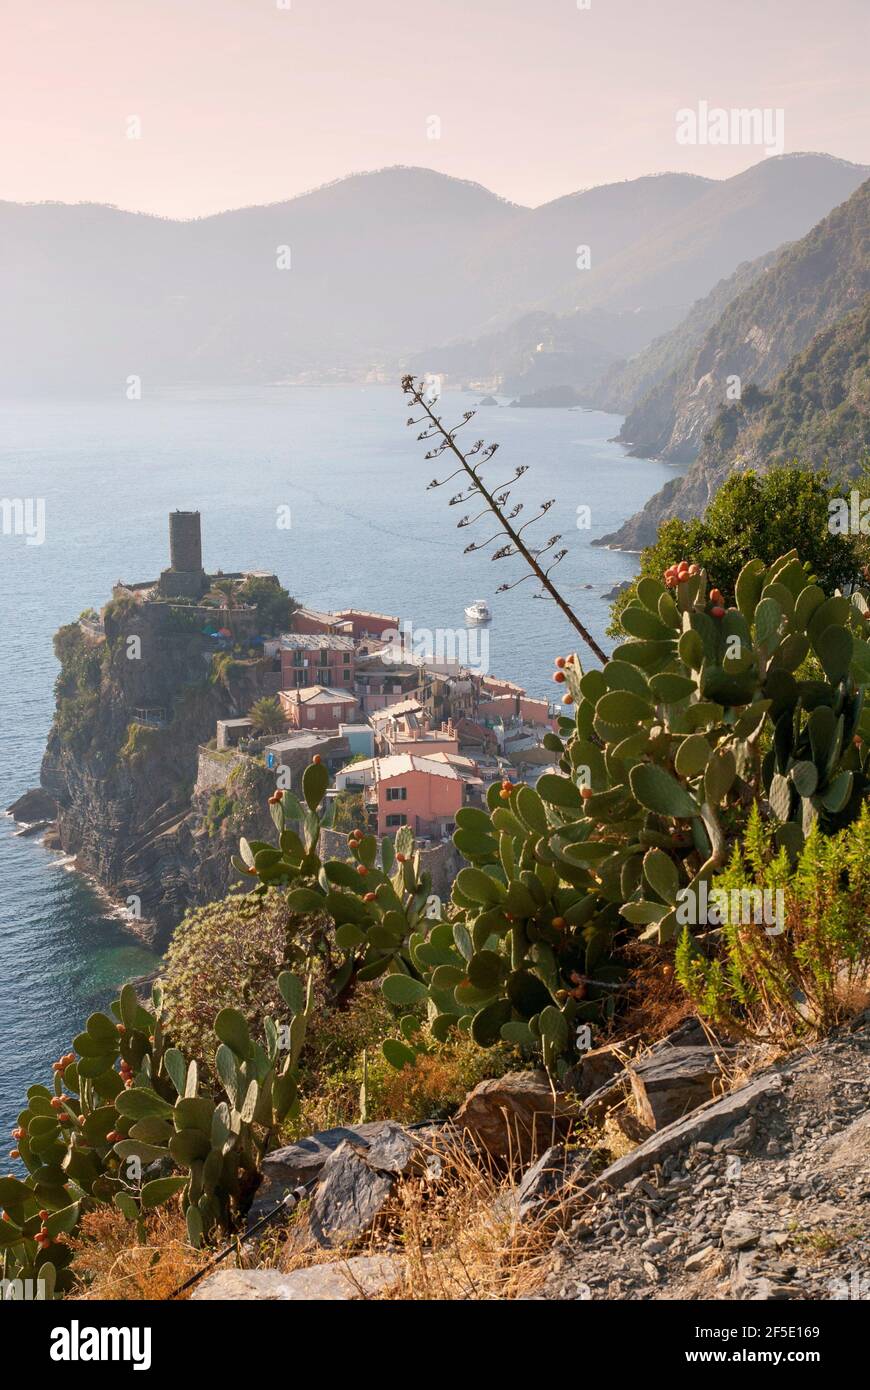 Italy's Cinque Terre: walking the Sentiero Azzurro between Corniglia and Vernazza. Looking down on the town of Vernazza. Stock Photo